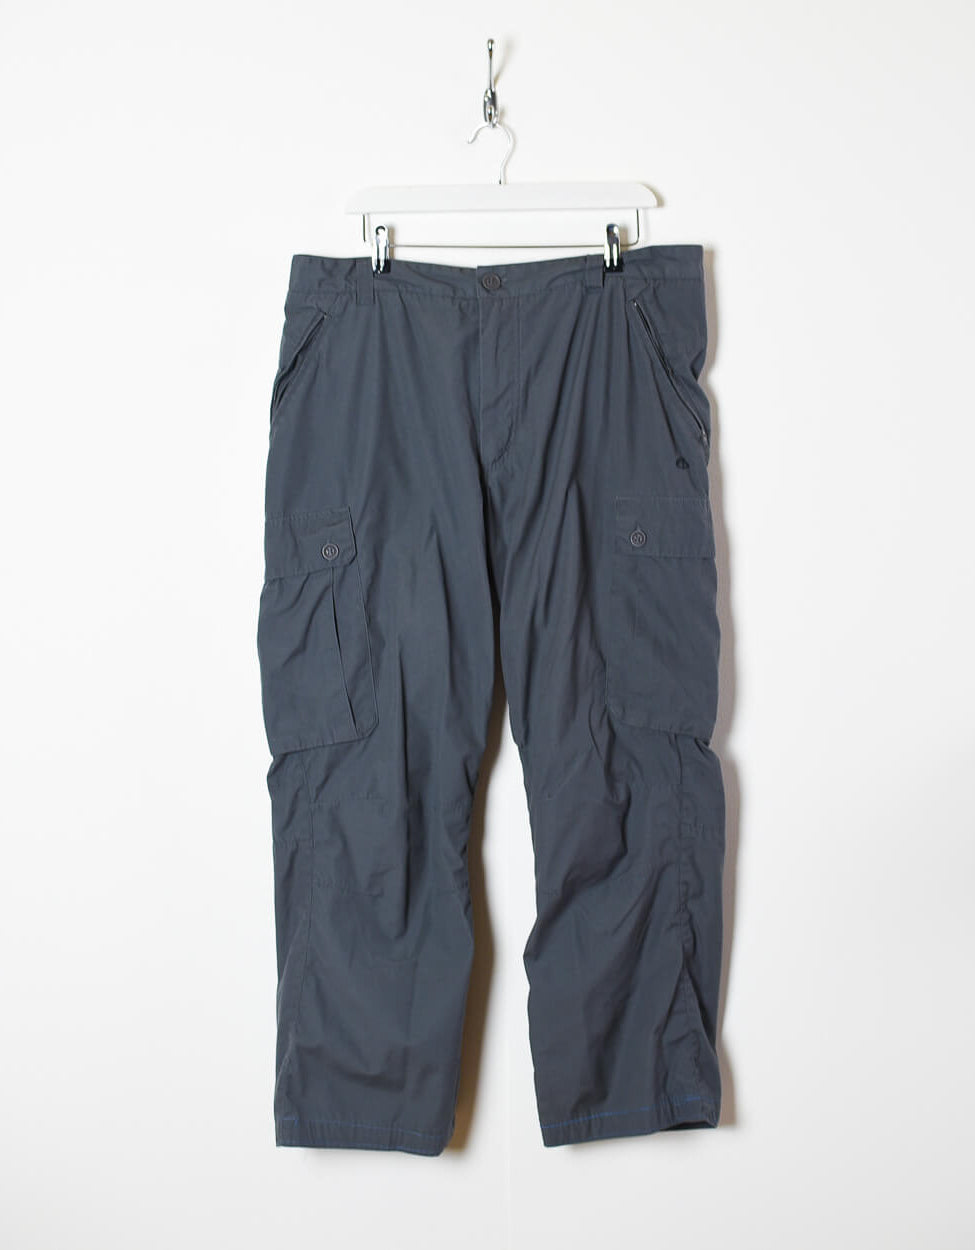 Grey Craighoppers Hiking Cargo Trousers - W38 L29